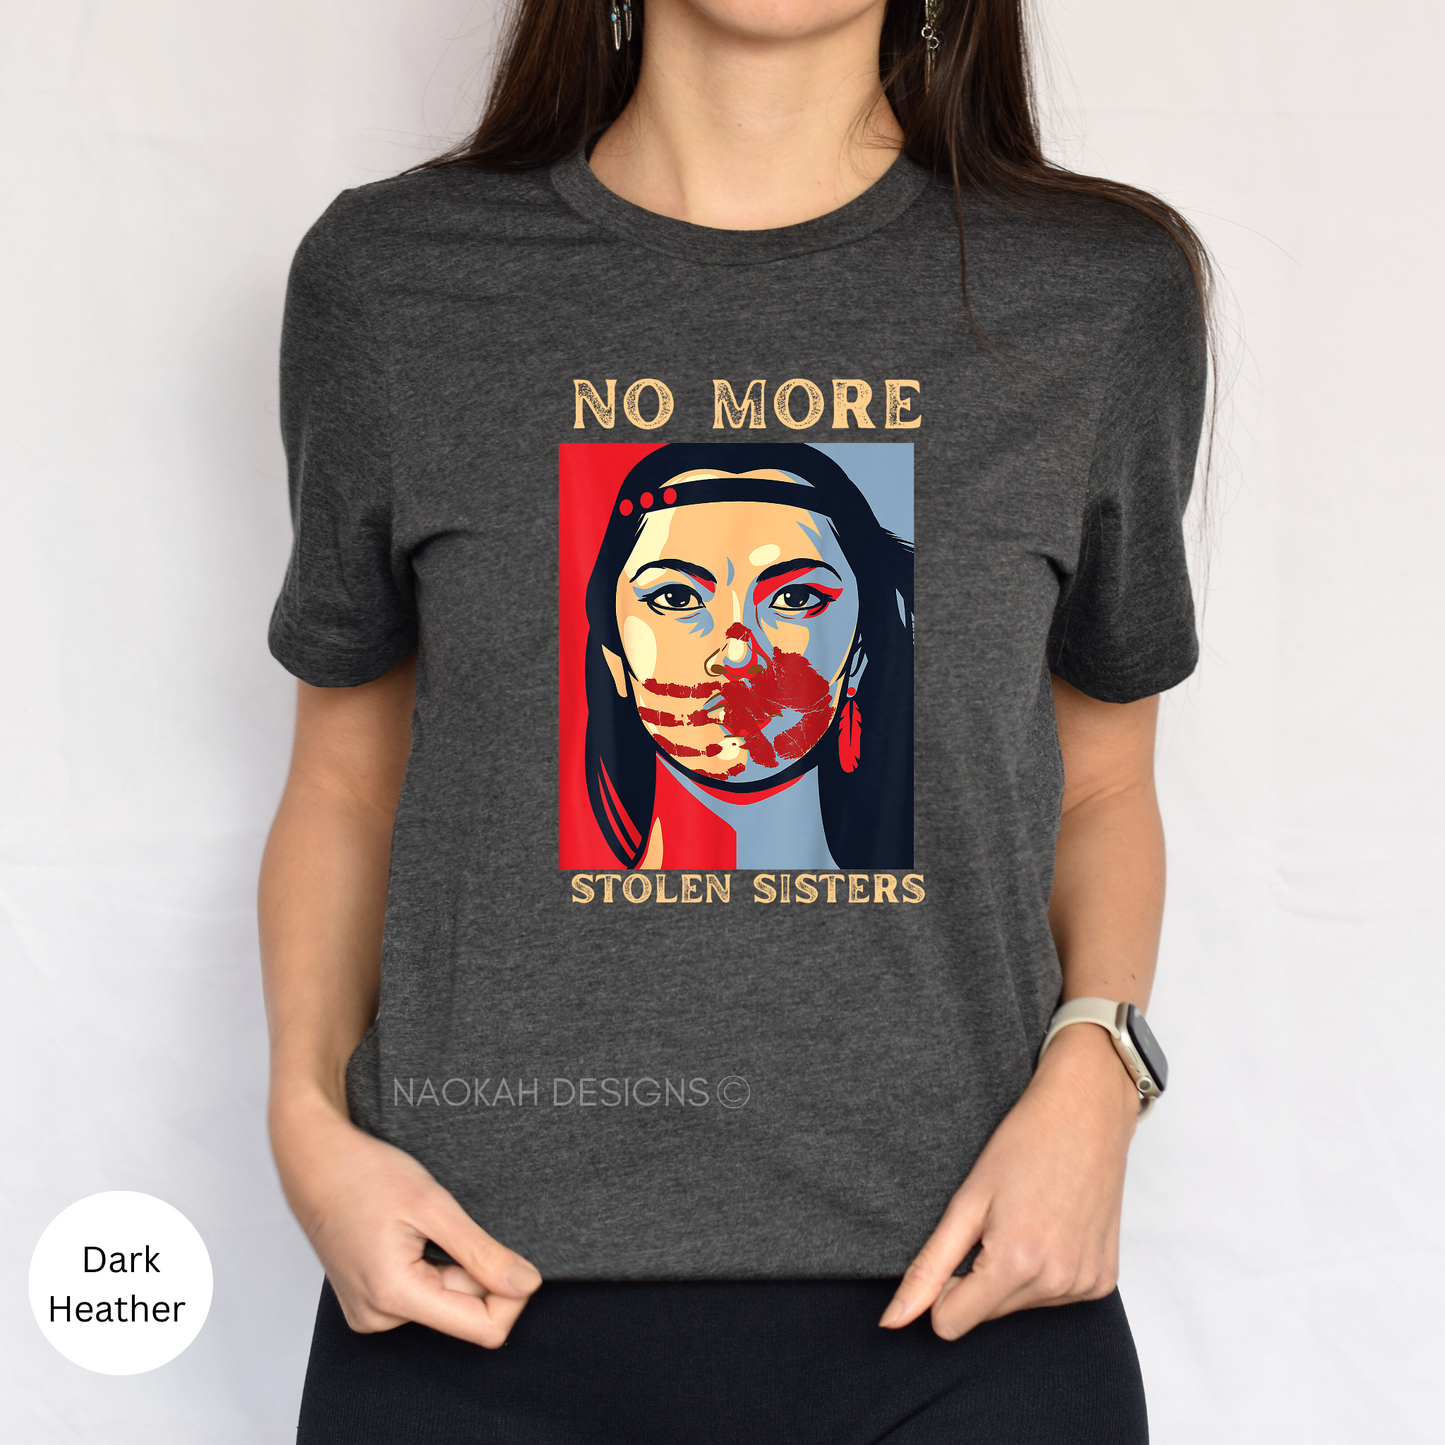 no more stolen sisters shirt, missing and murdered indigenous women shirt, mmiw shirt, i wear red for my sisters shirt, indigenous owned shop